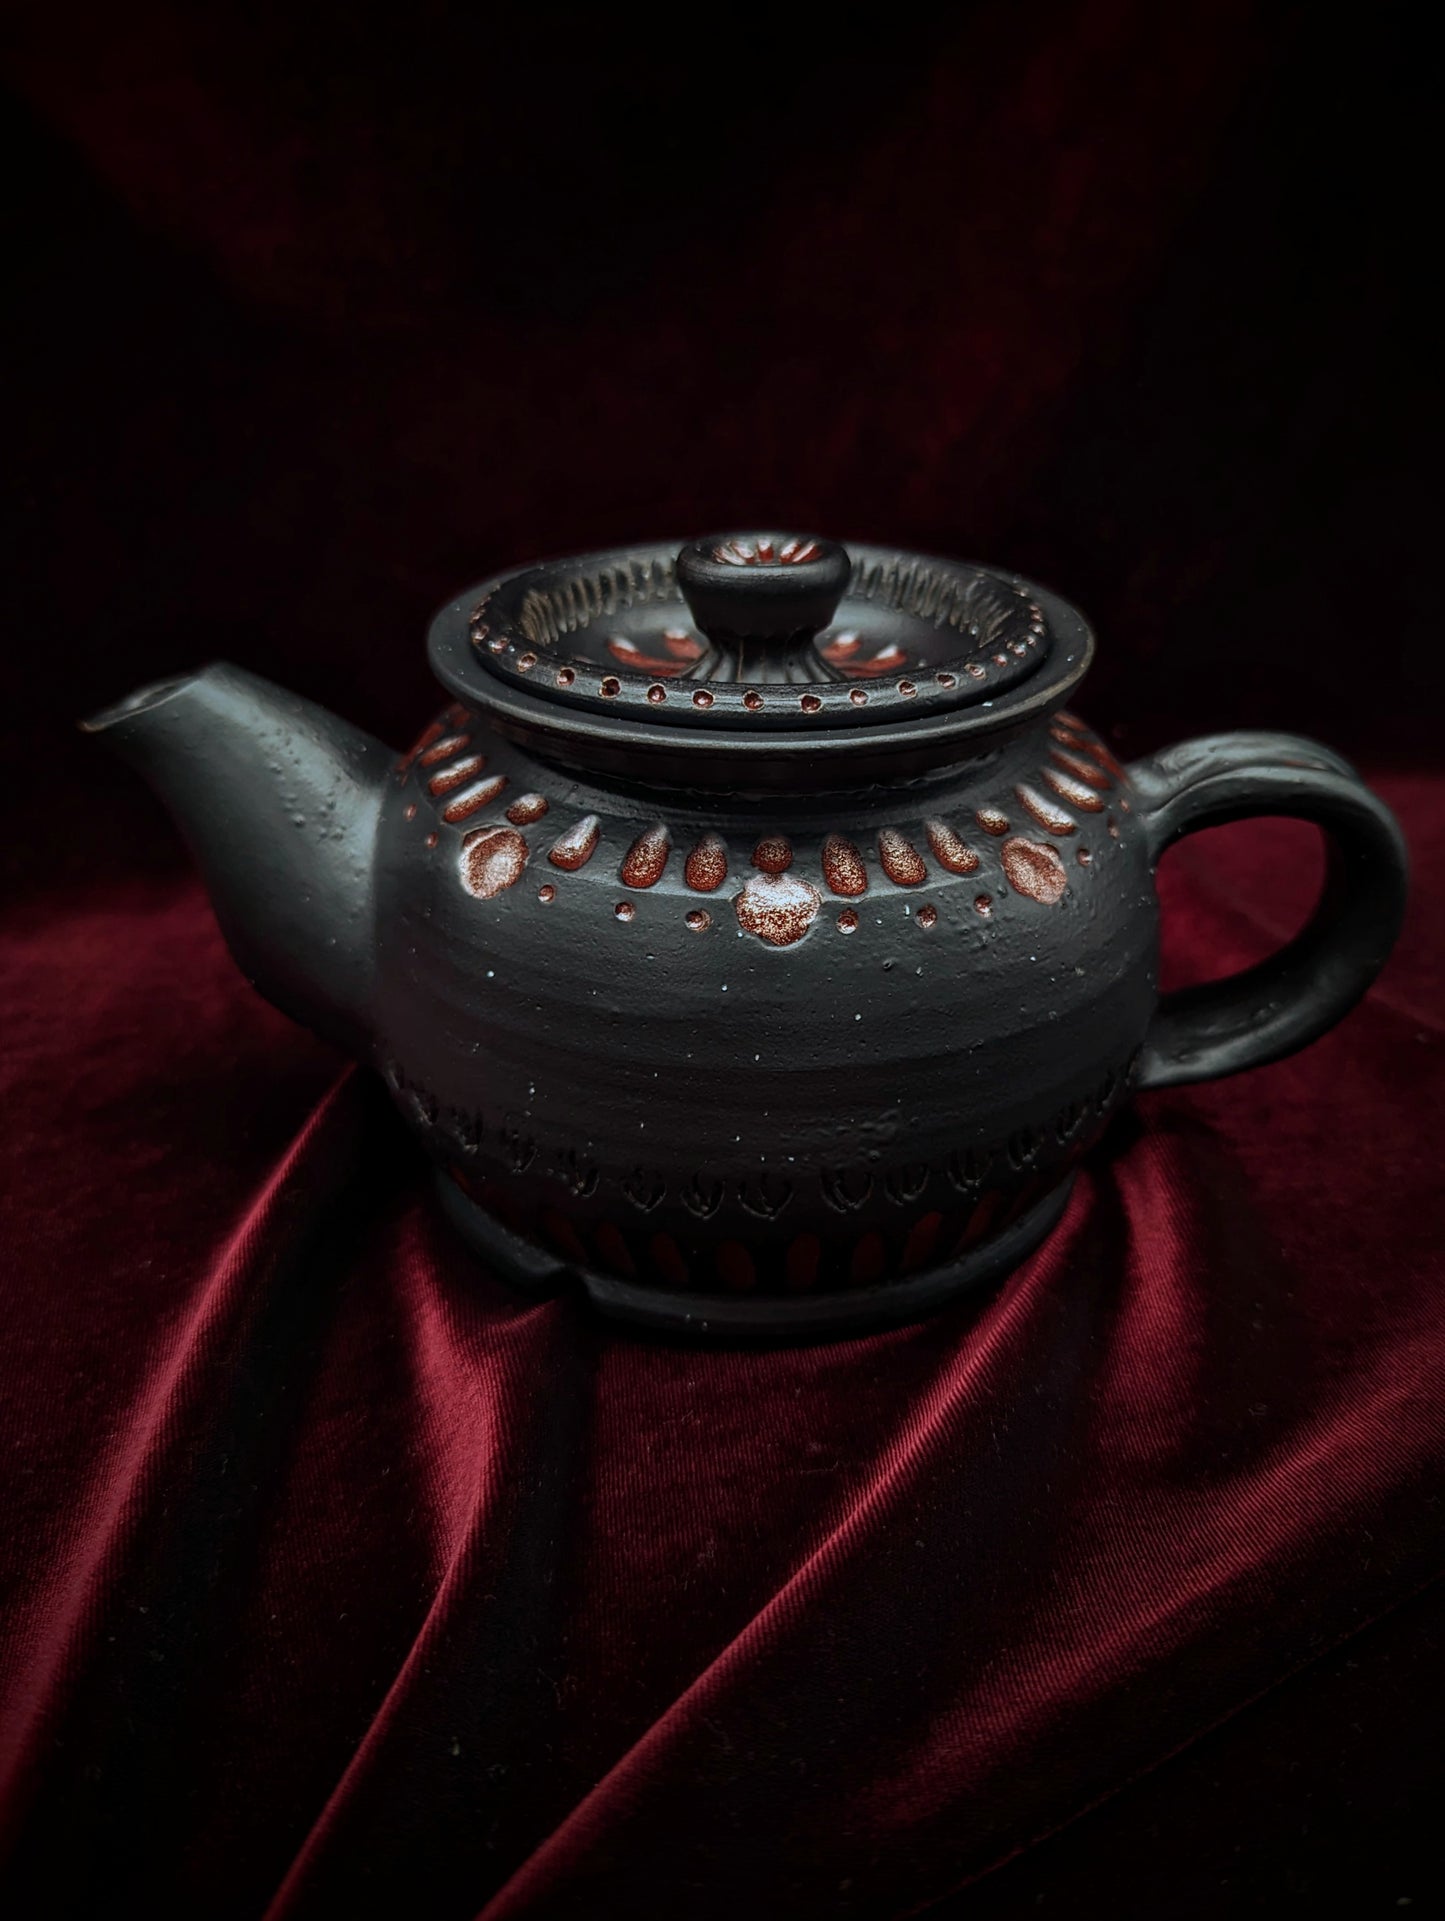 .Flower Motif Personal Teapot - Black and Red